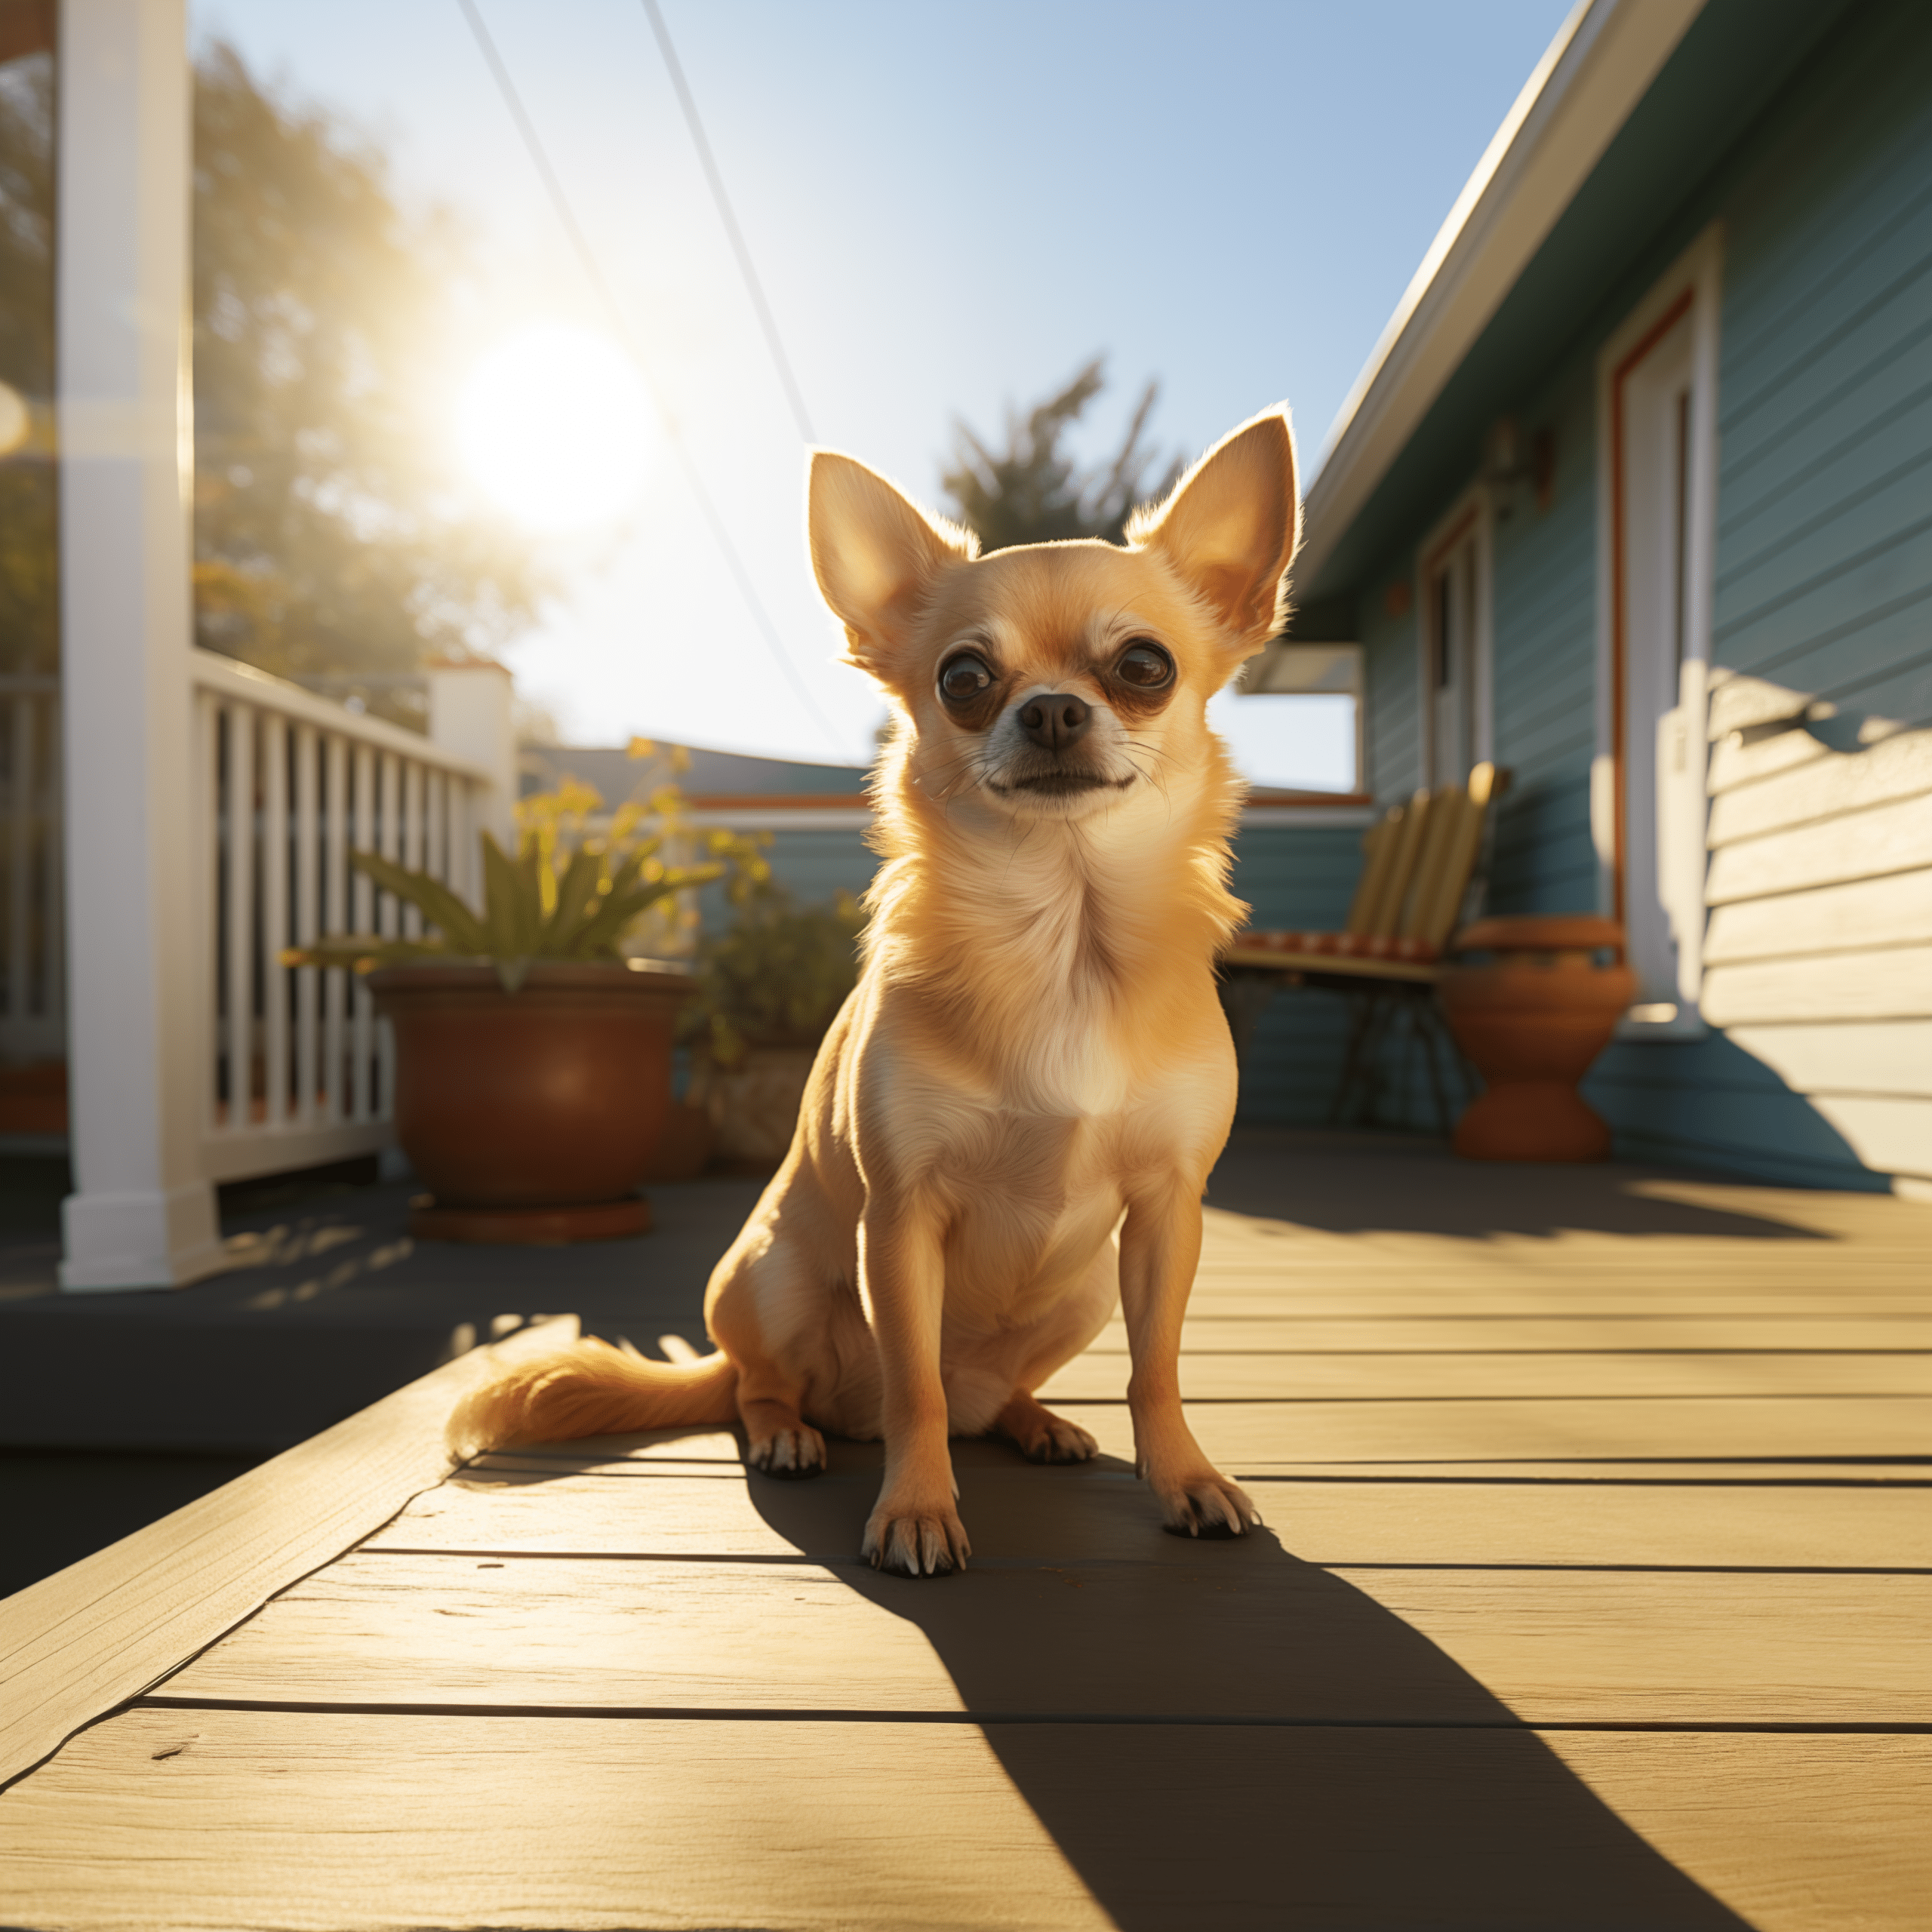 Chihuahua Dog Sitting In Home Porch